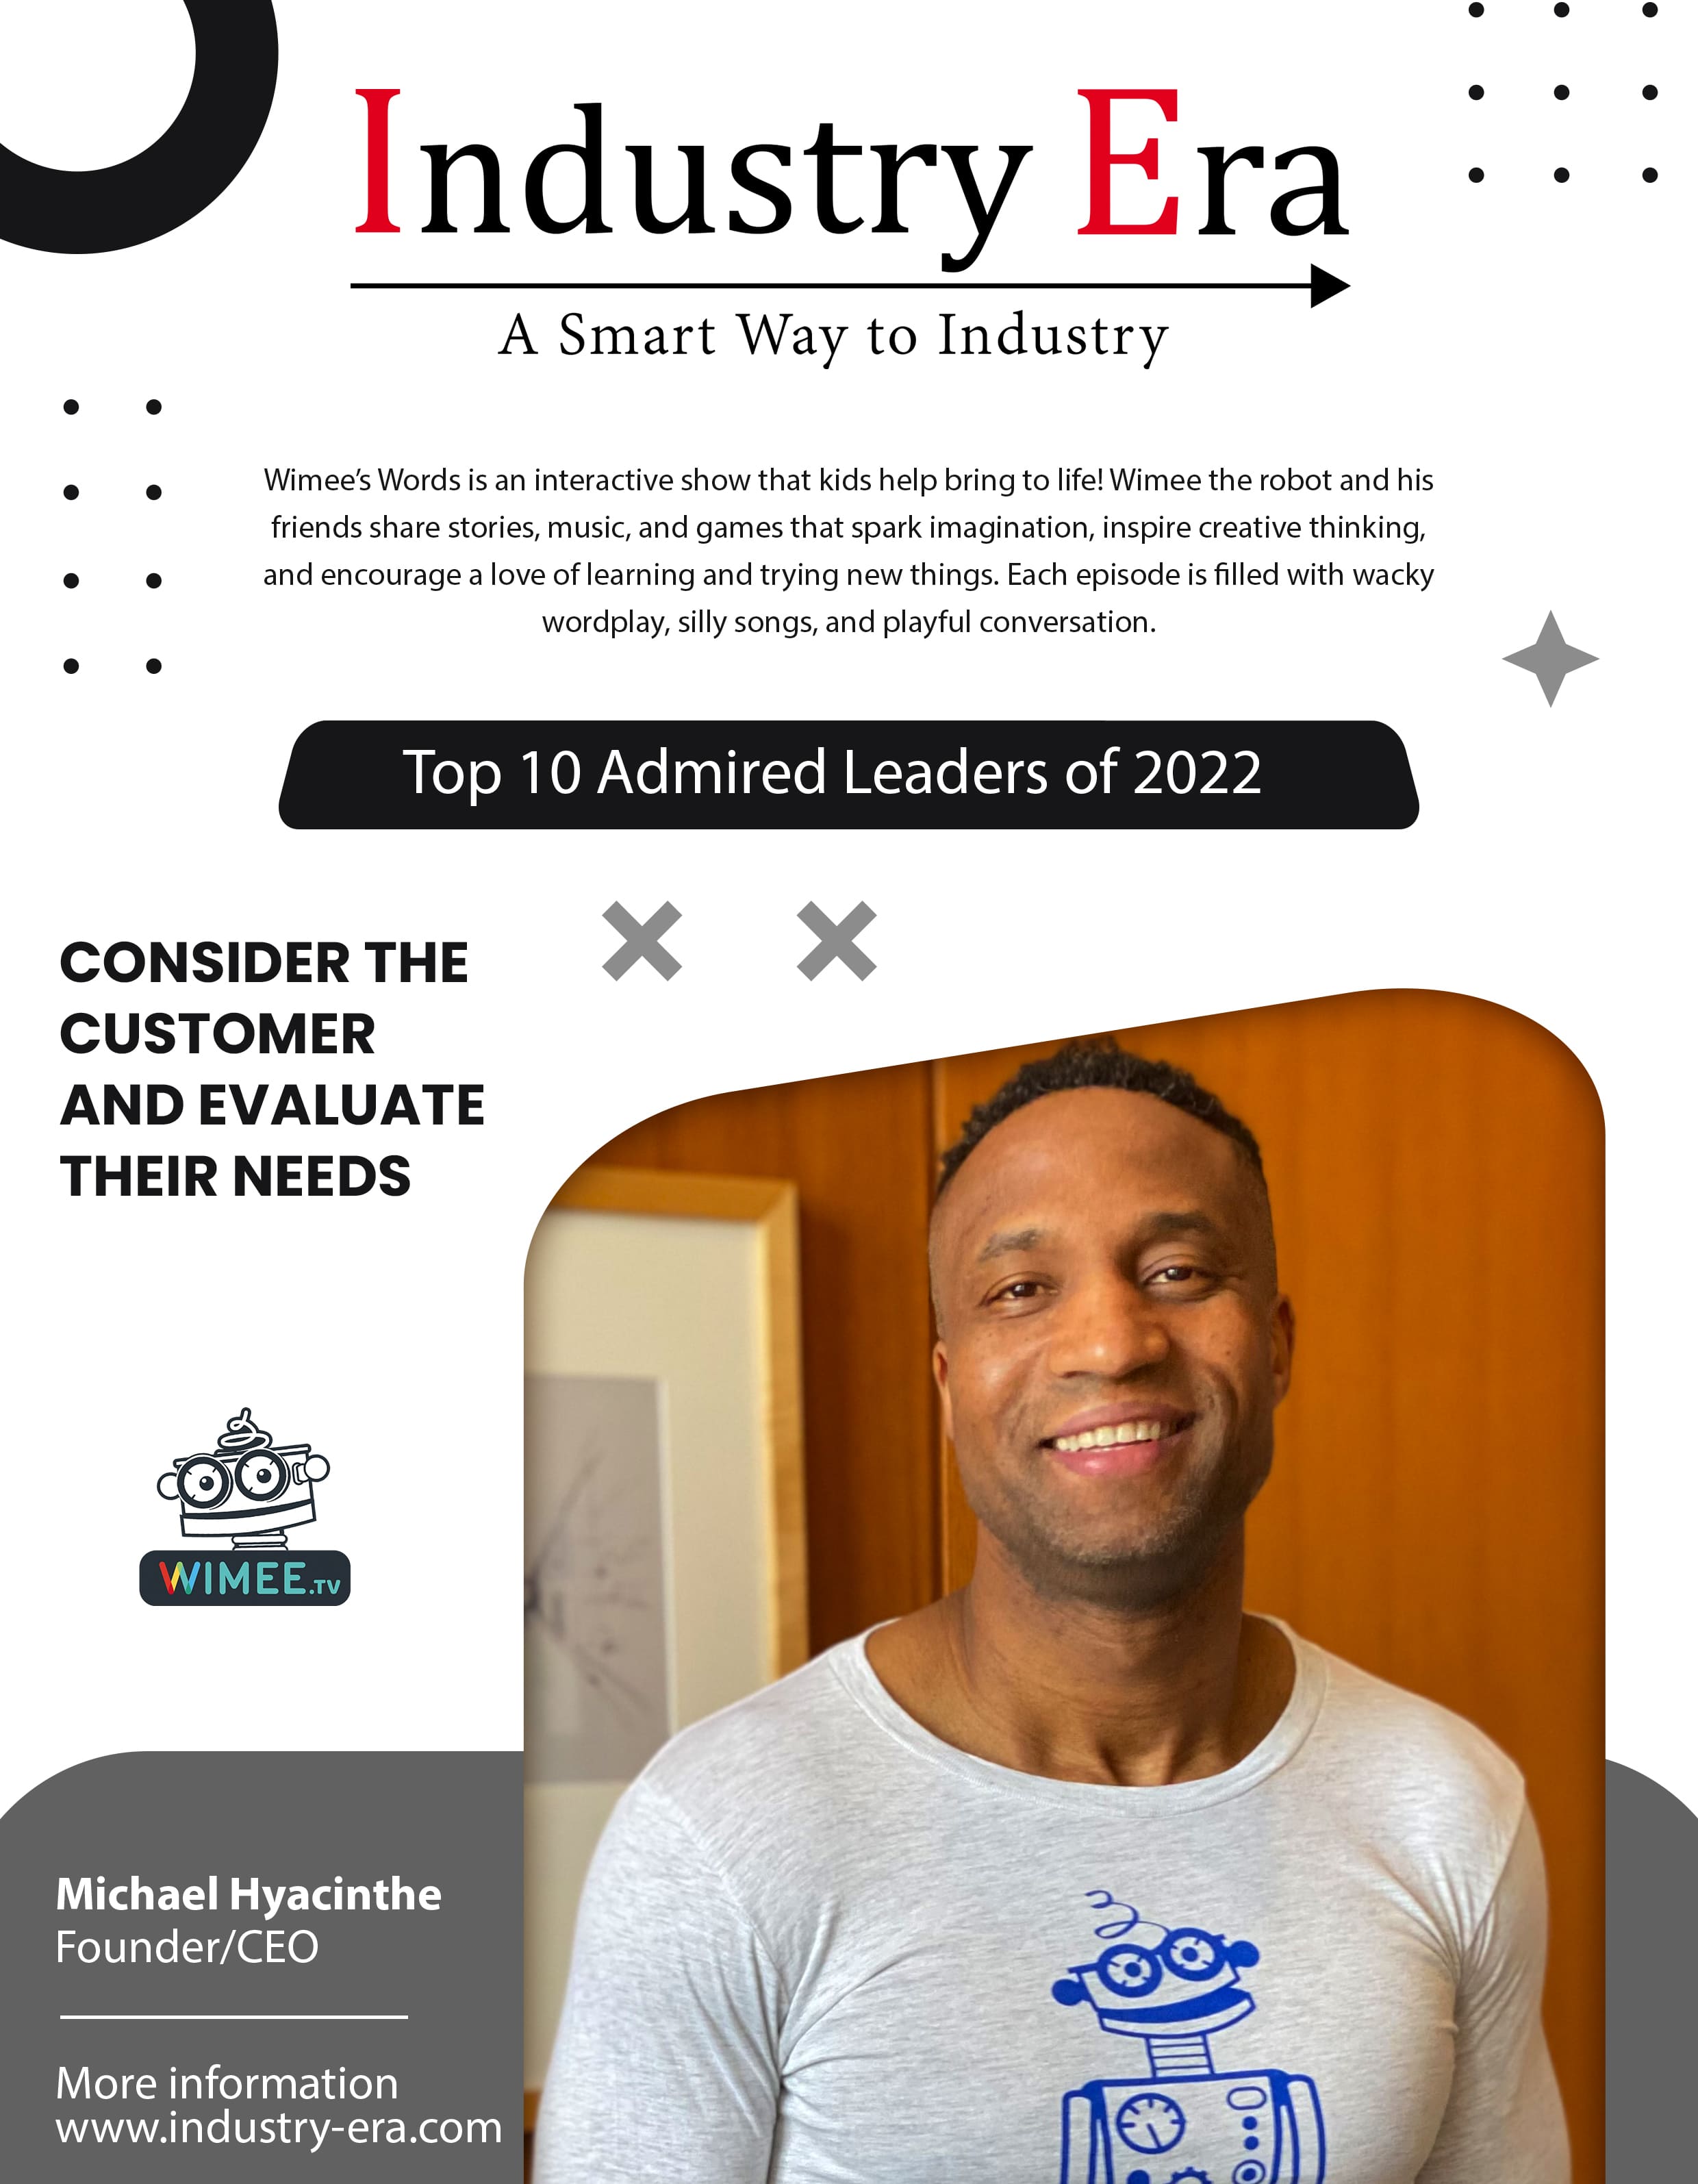 Michael Hyacinthe, Founder/CEO of Wimage LLC, Top 10 Admired Leaders of